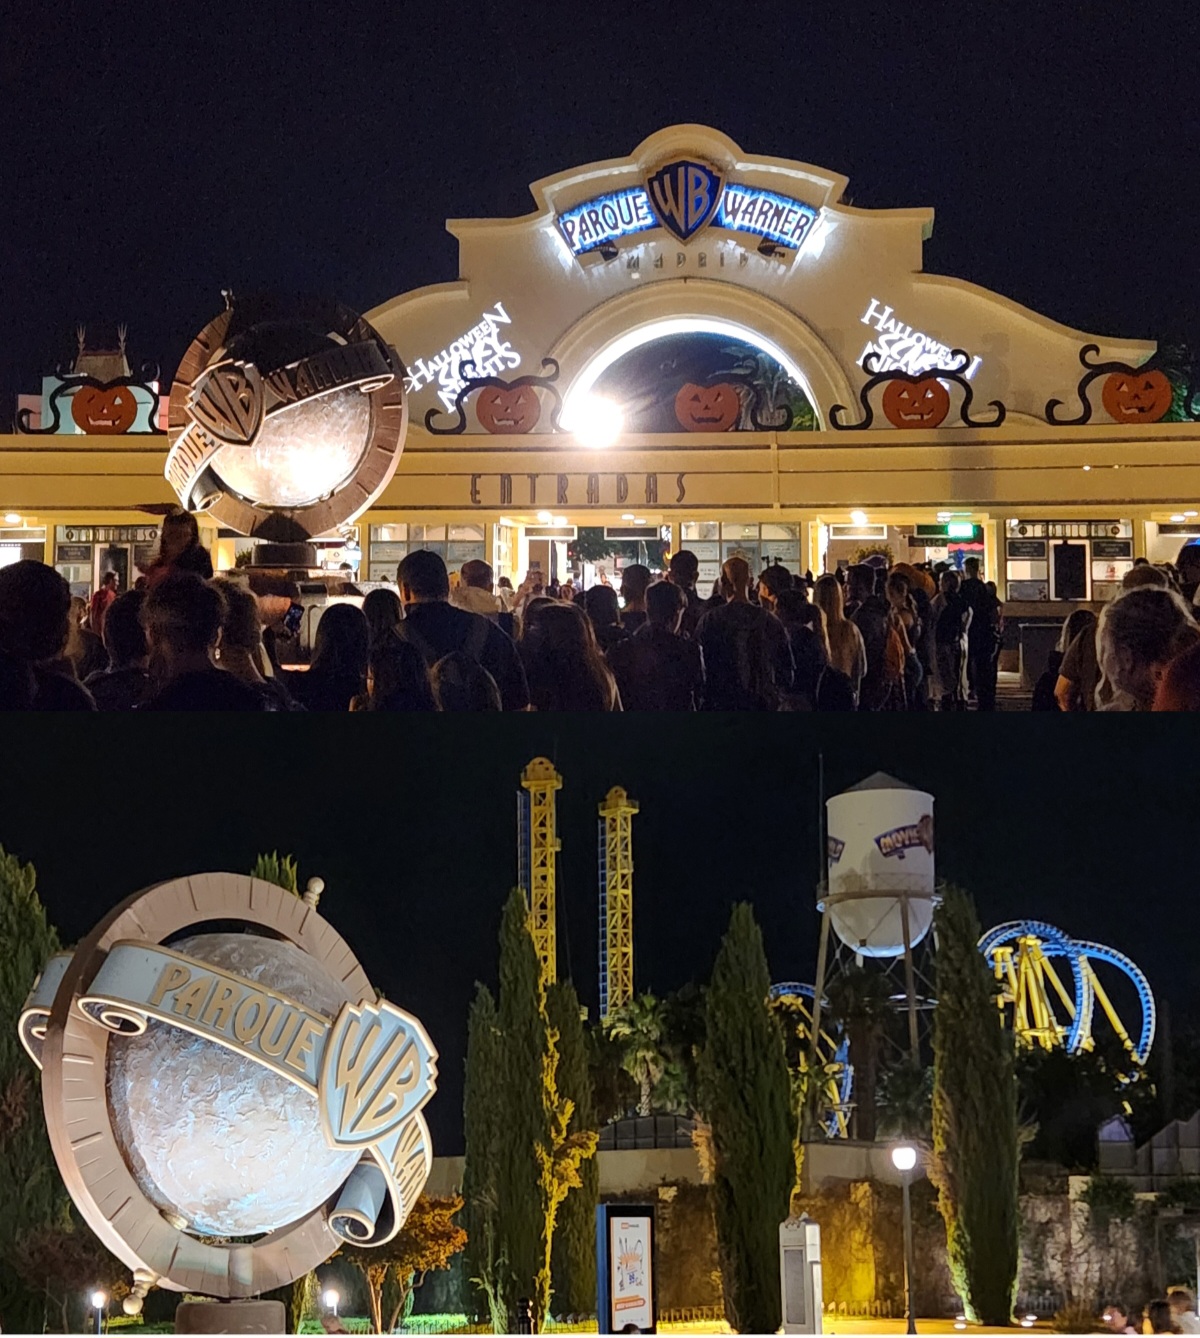 Parque Warner Madrid and the Quest for Night Rides! - Coaster Kings